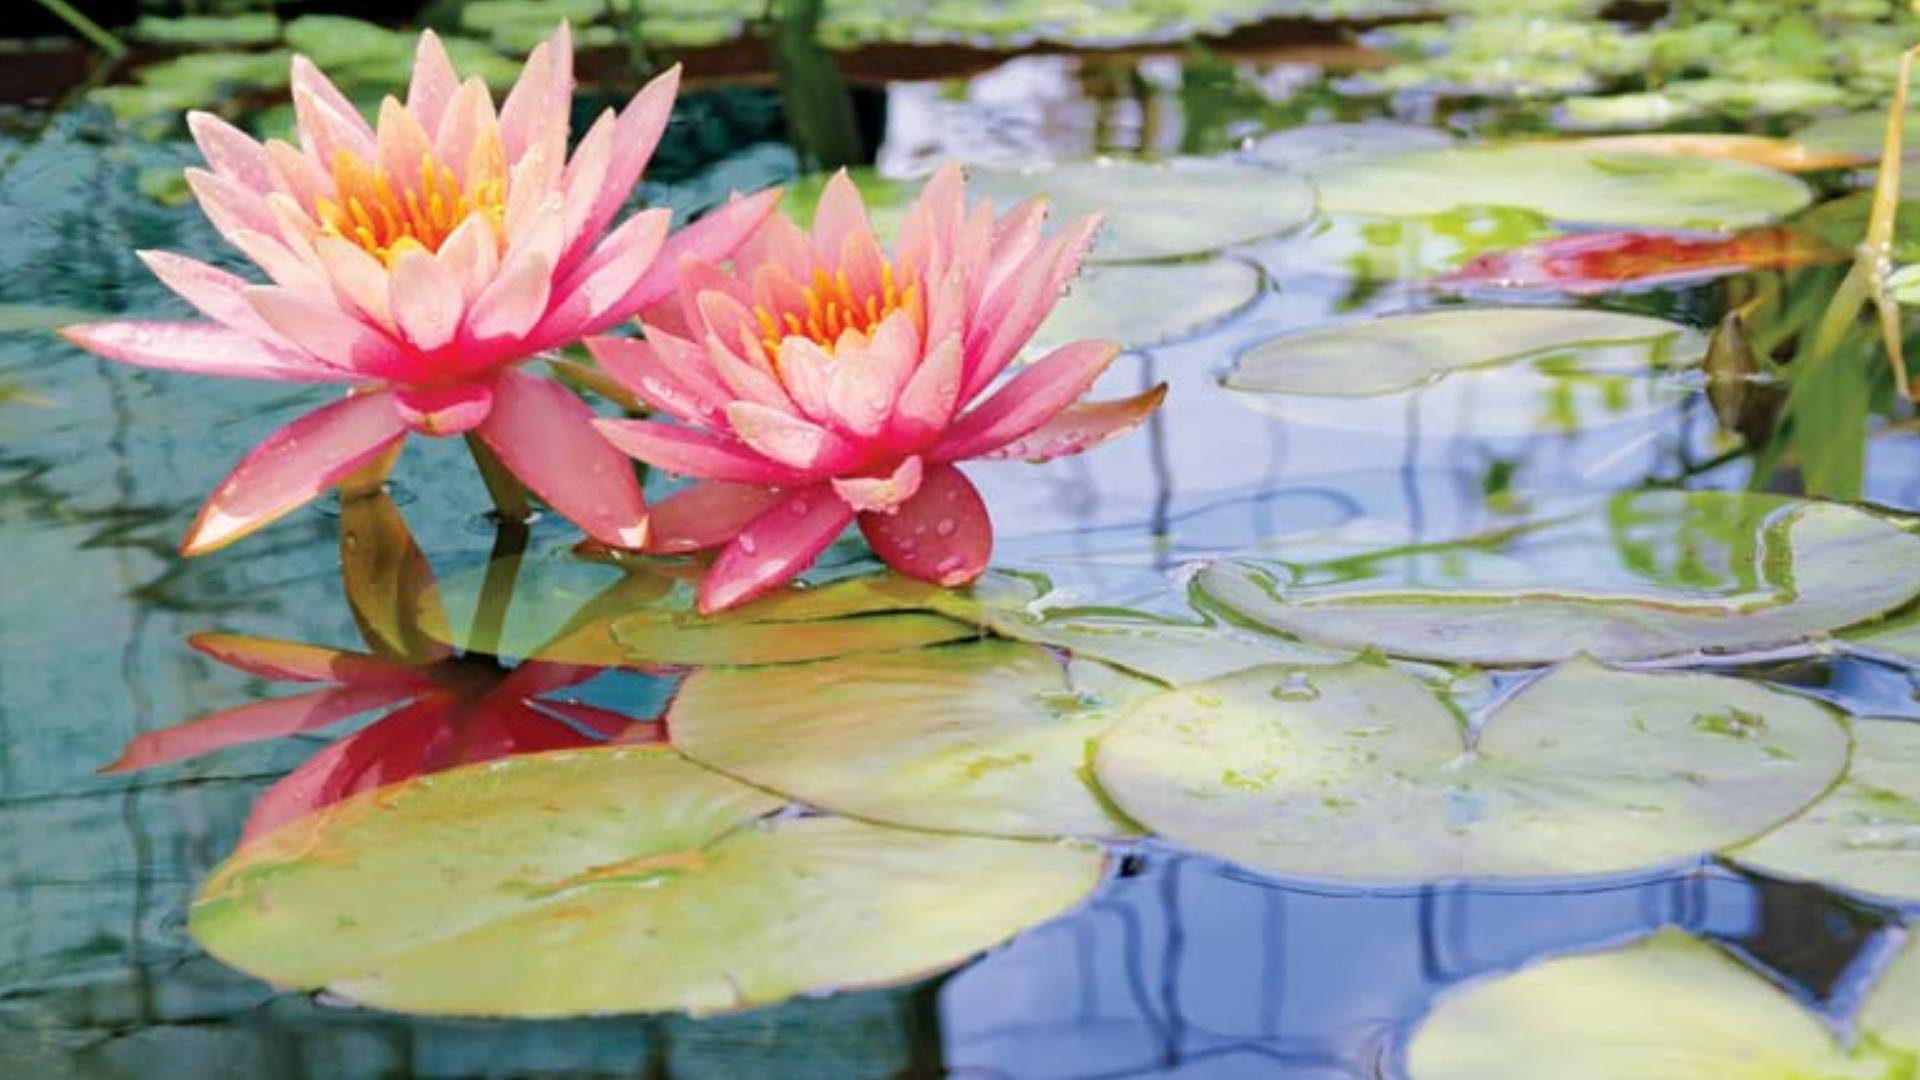 Tranquil Scene Of Splendid Water Lilies Blooming Amidst Lush Foliage.